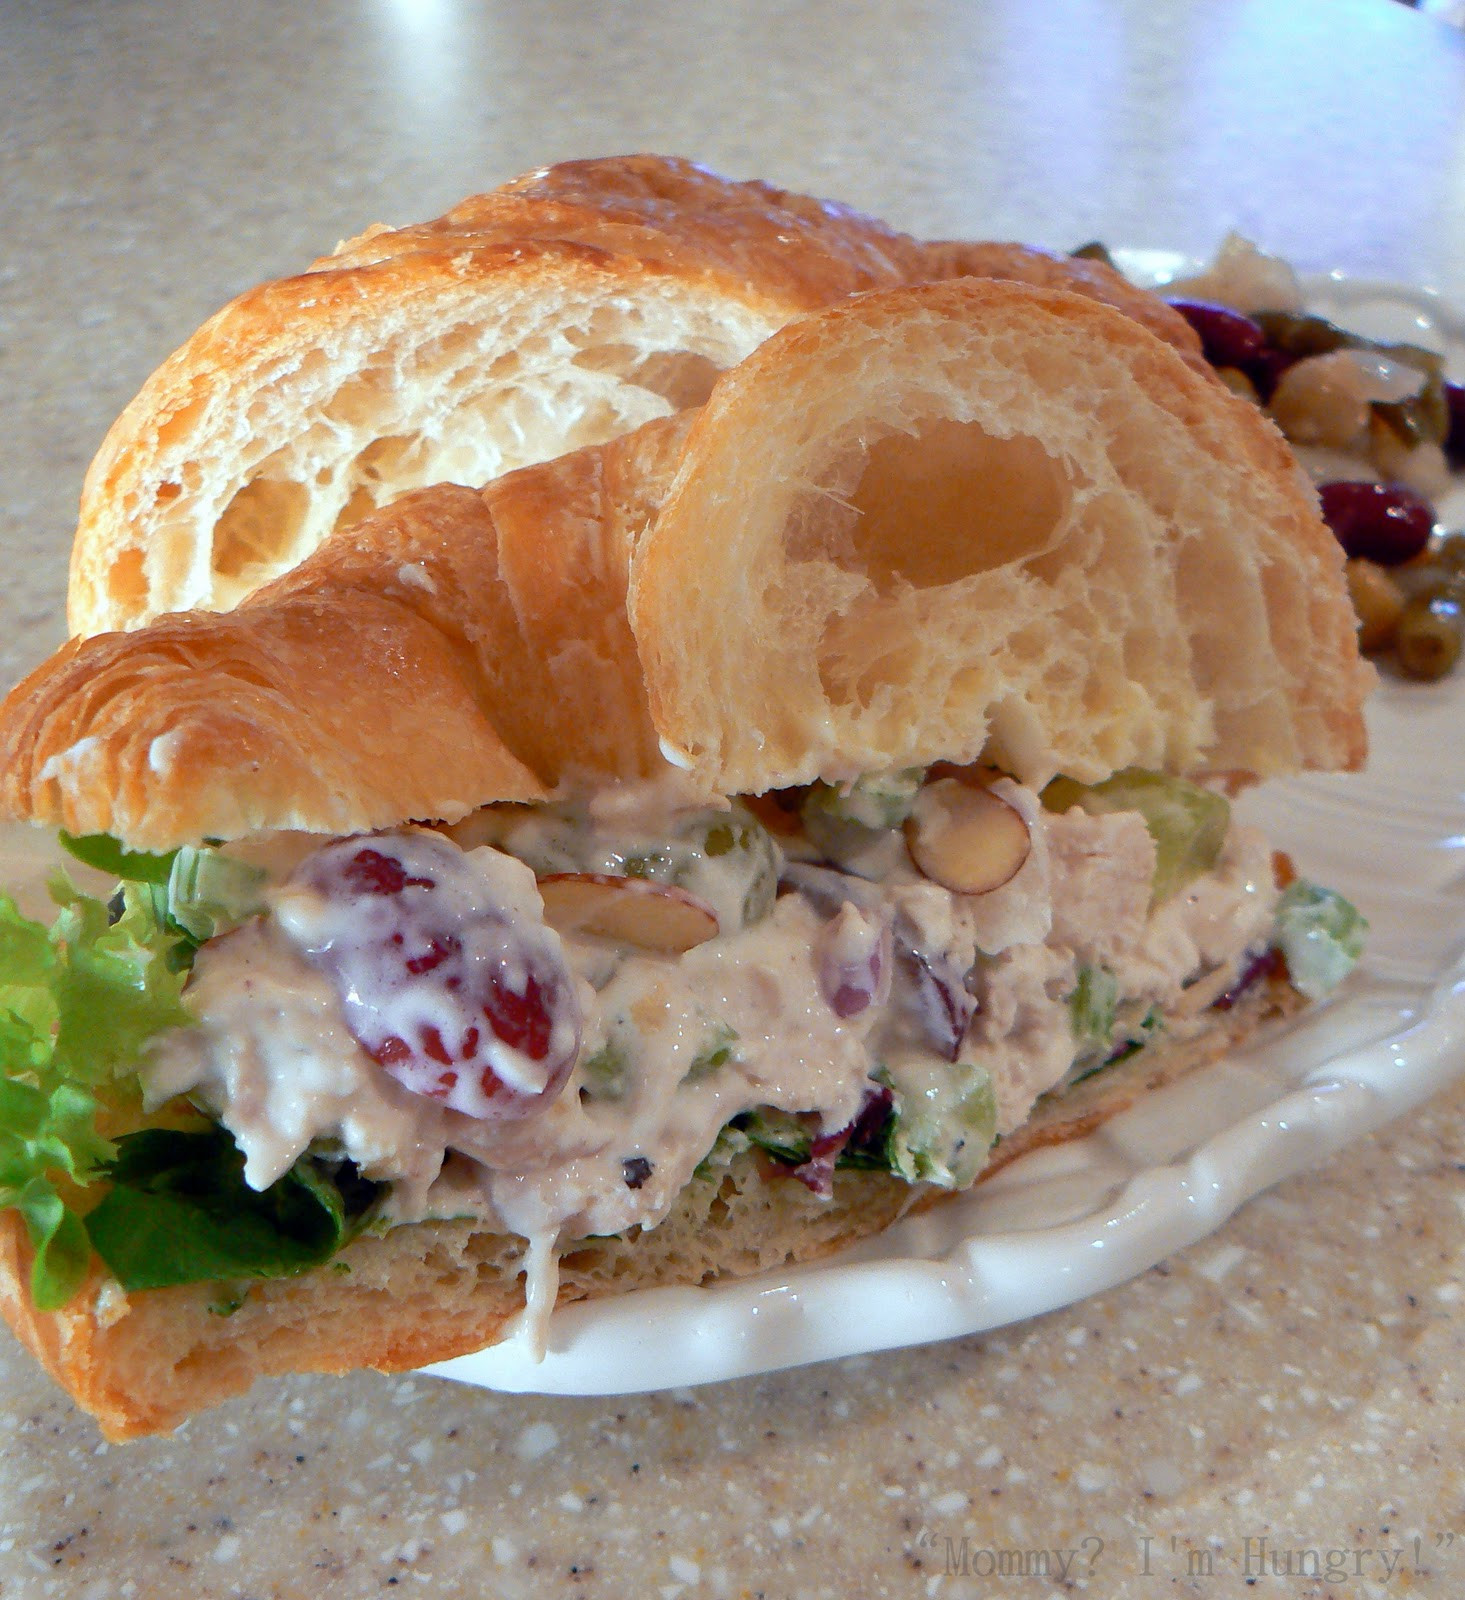 Chicken Salad Sandwich Recipe Grapes
 MIH Recipe Blog Mom s Chicken Salad with Grapes on Croissants